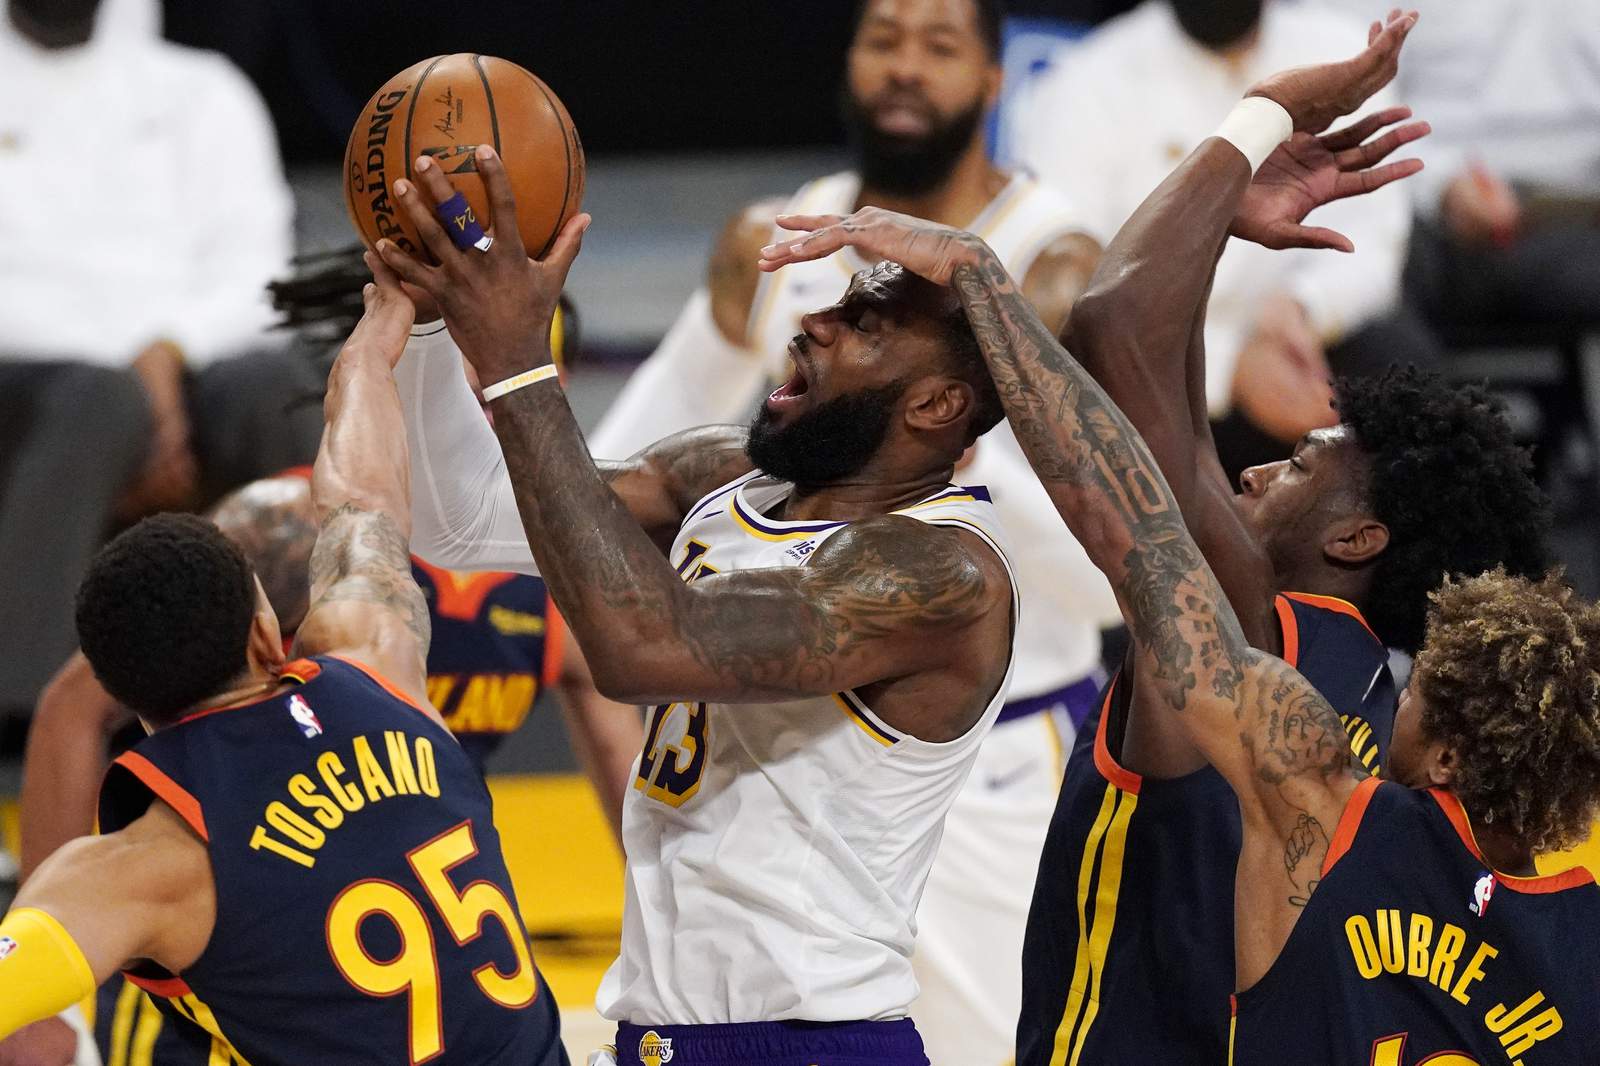 LeBron James scores 56 points, Lakers beat Warriors to end skid